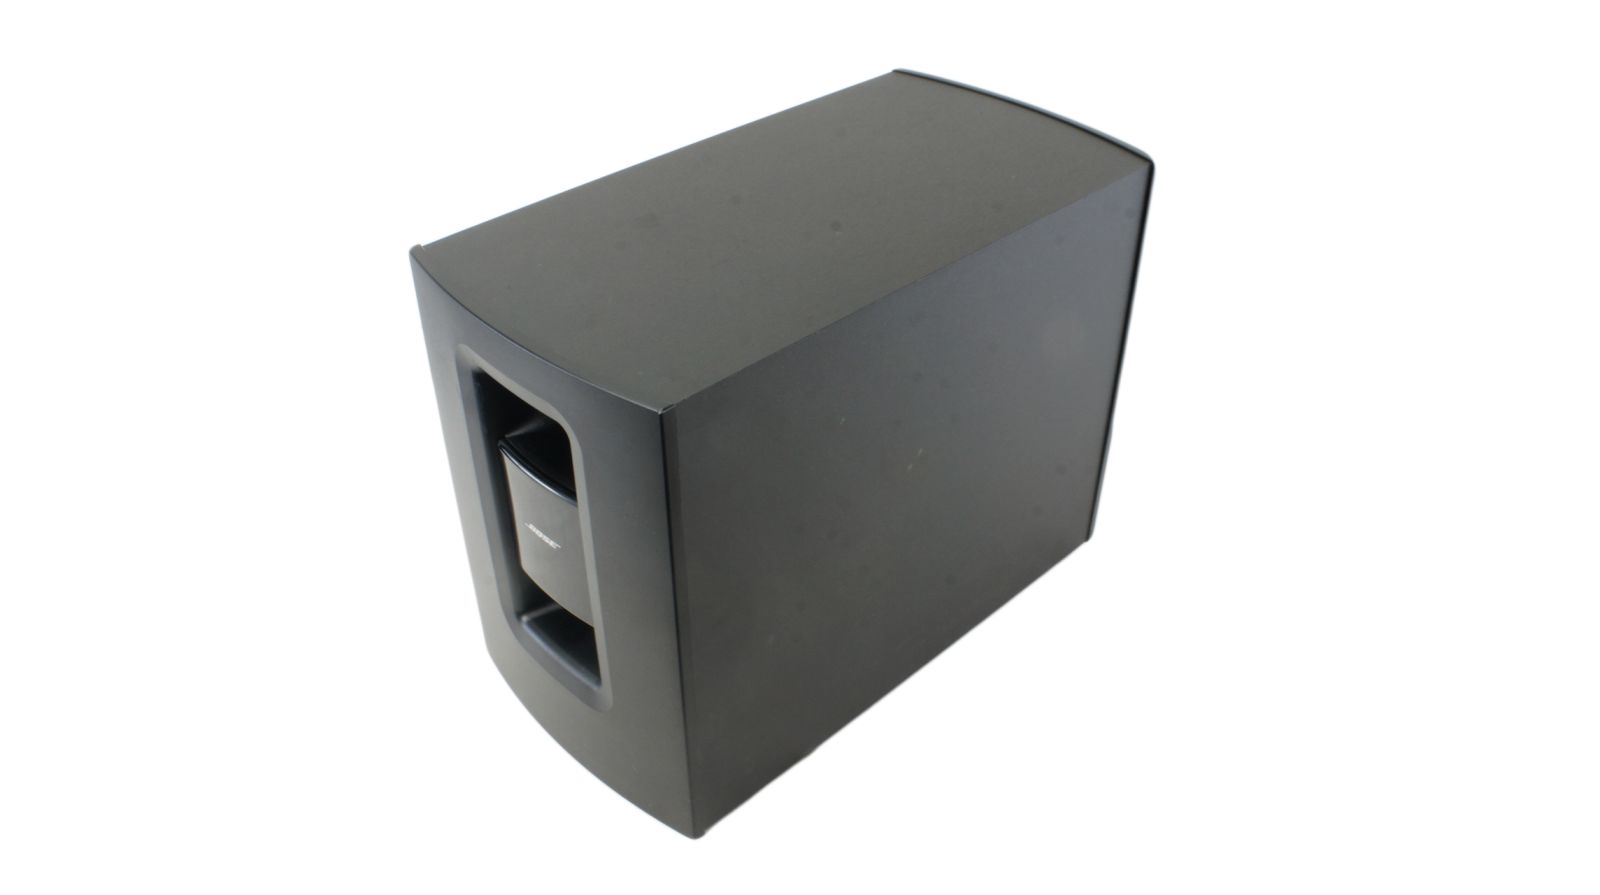 Bose_SoundTouch_Heimkino-system_Subwoofer_04